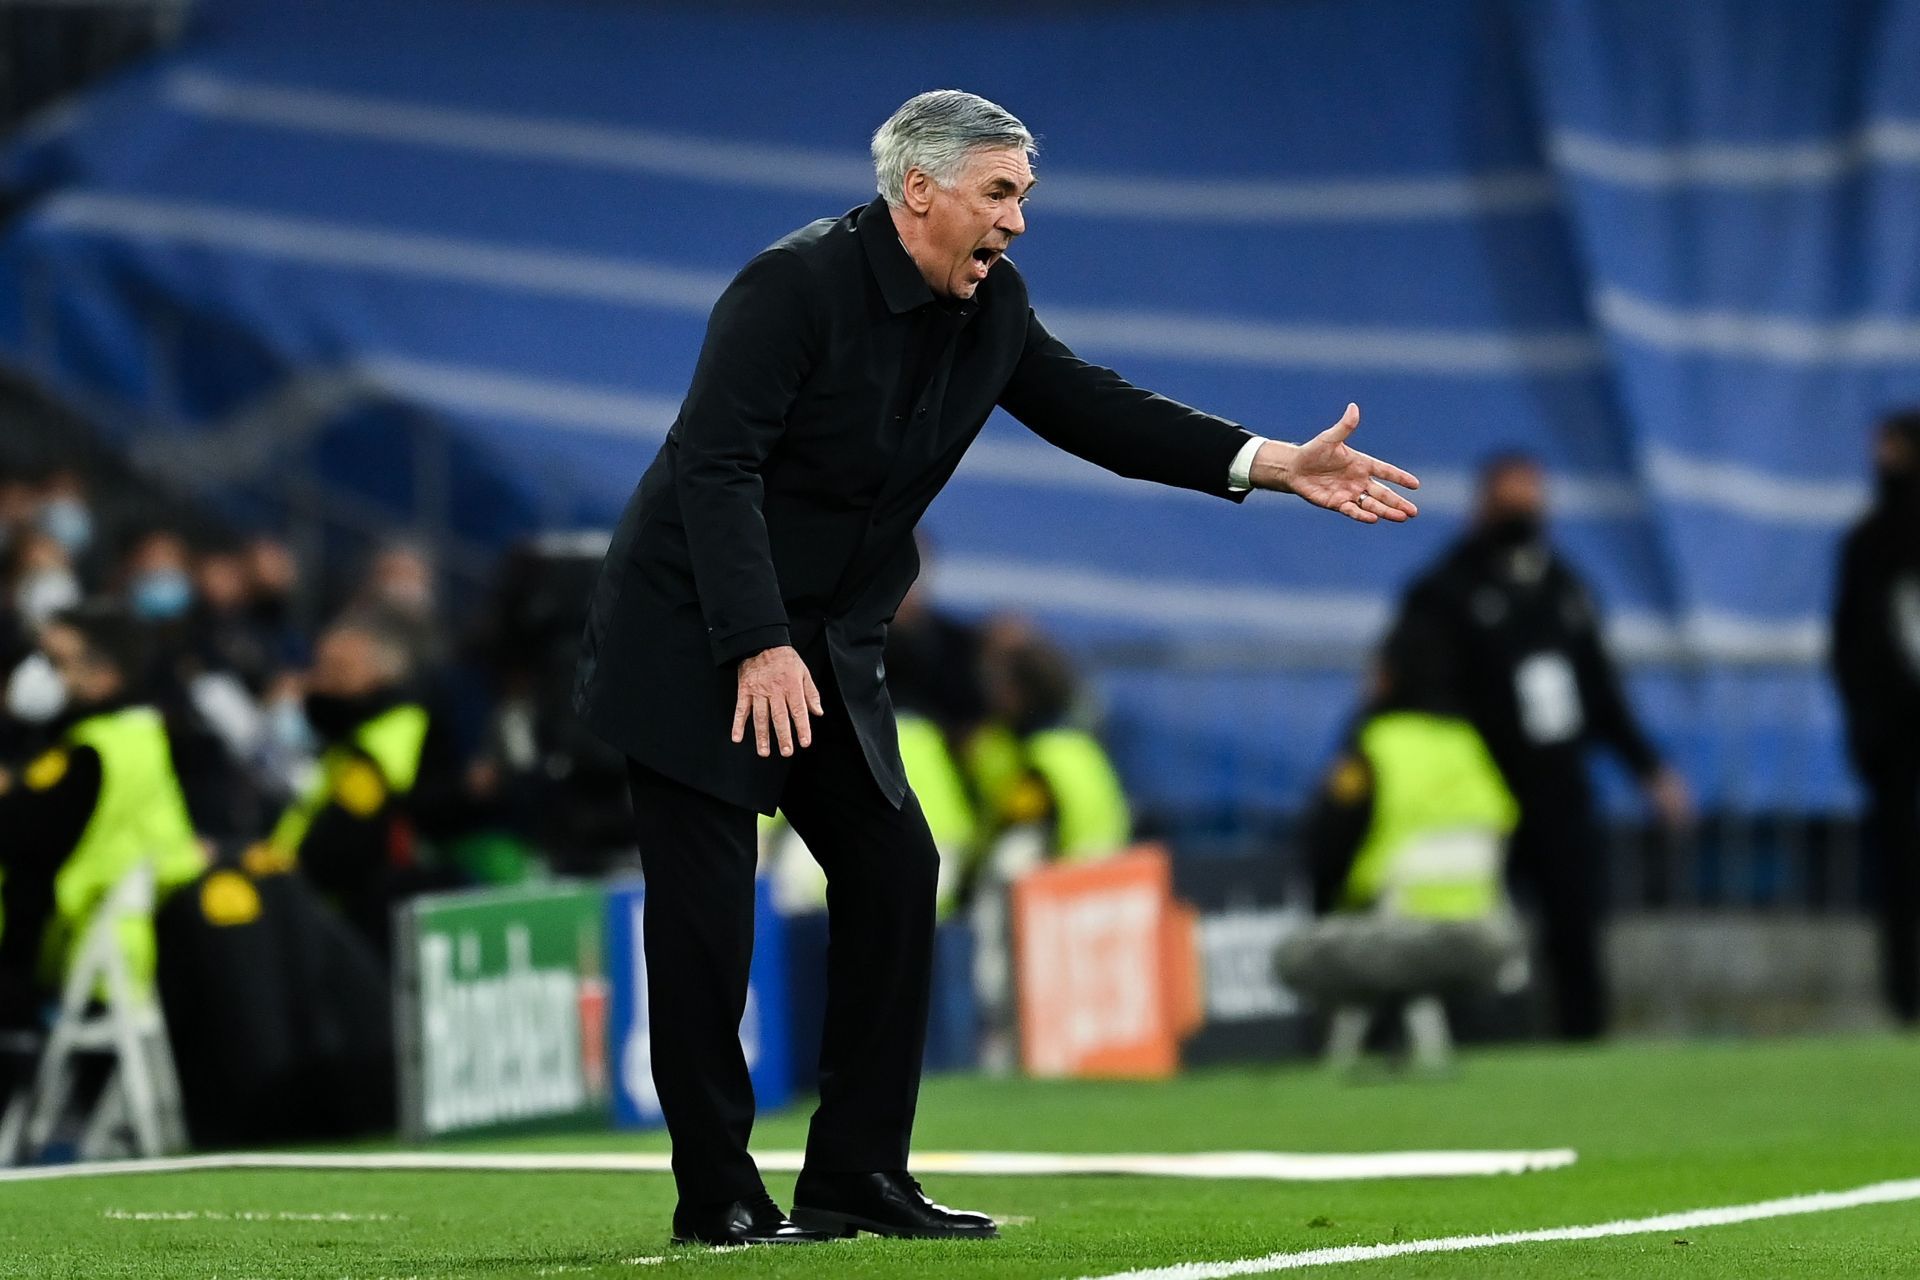 Ancelotti will be hoping to guide Real Madrid into the semi-finals of the Champions League